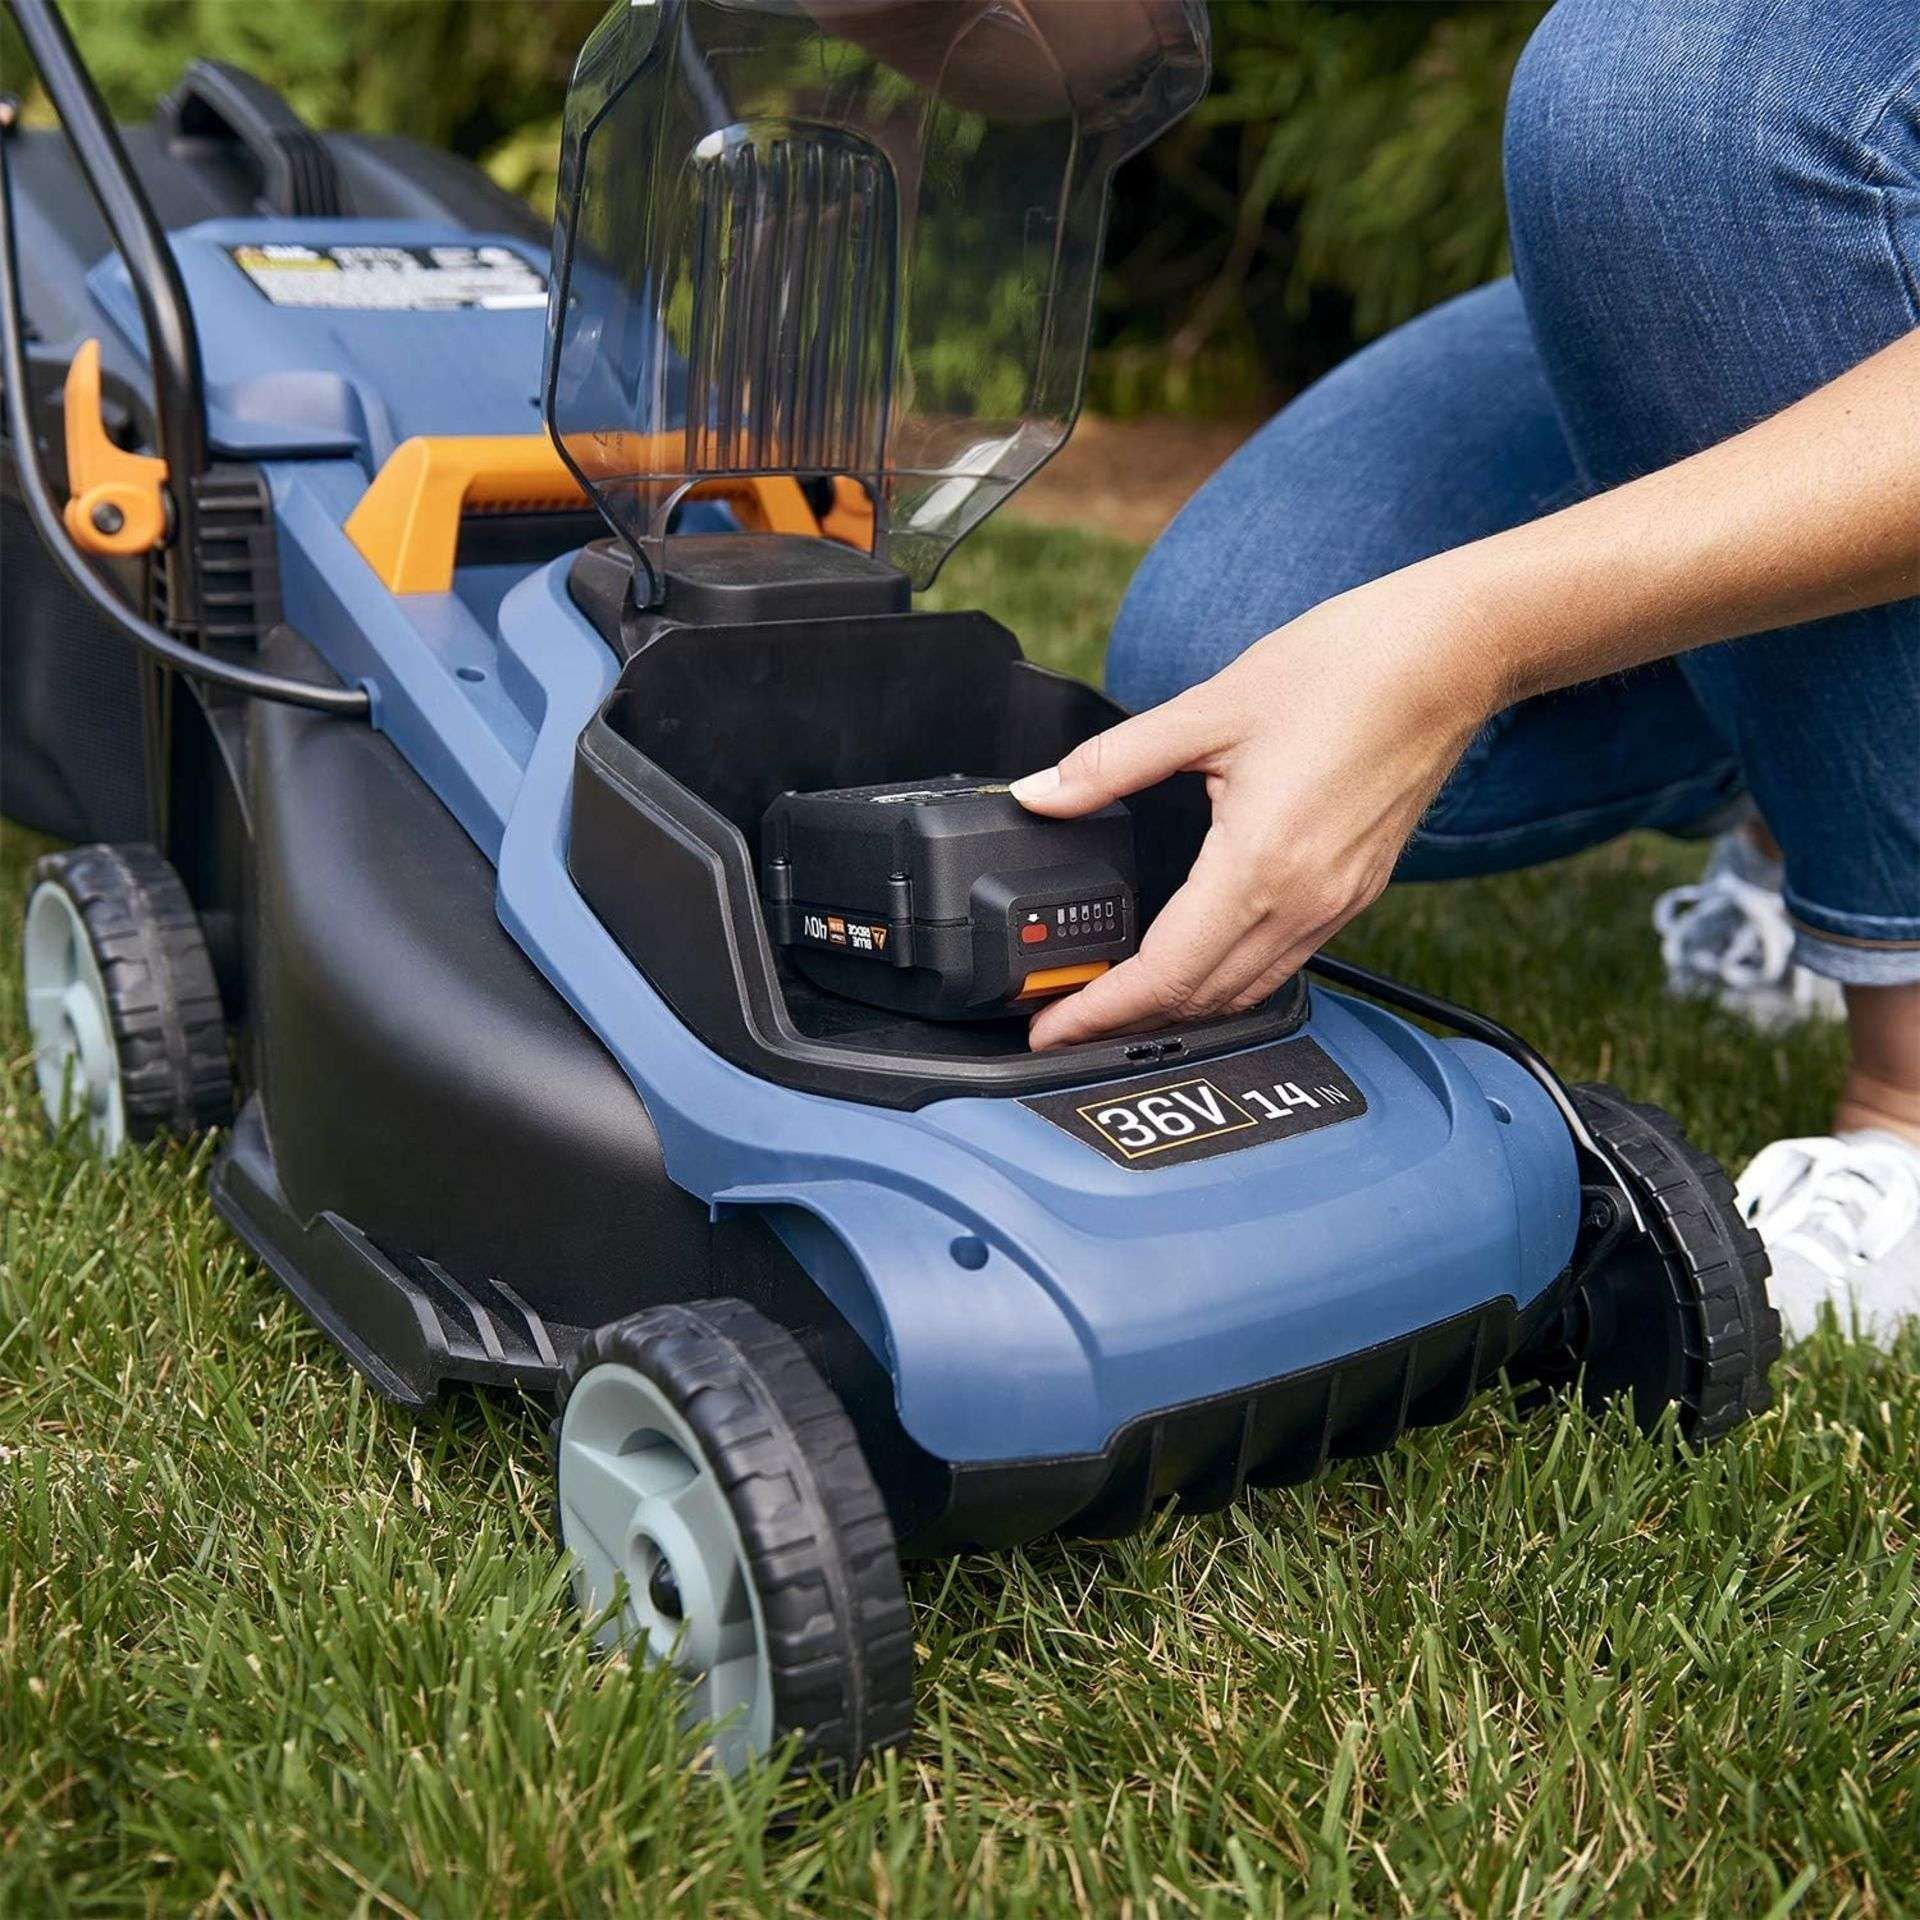 NEW & BOXED BLUE RIDGE 36V Cordless Lawnmower with 2.0 Ah Li-ion Battery. RRP £229 EACH. Powerful - Image 2 of 3